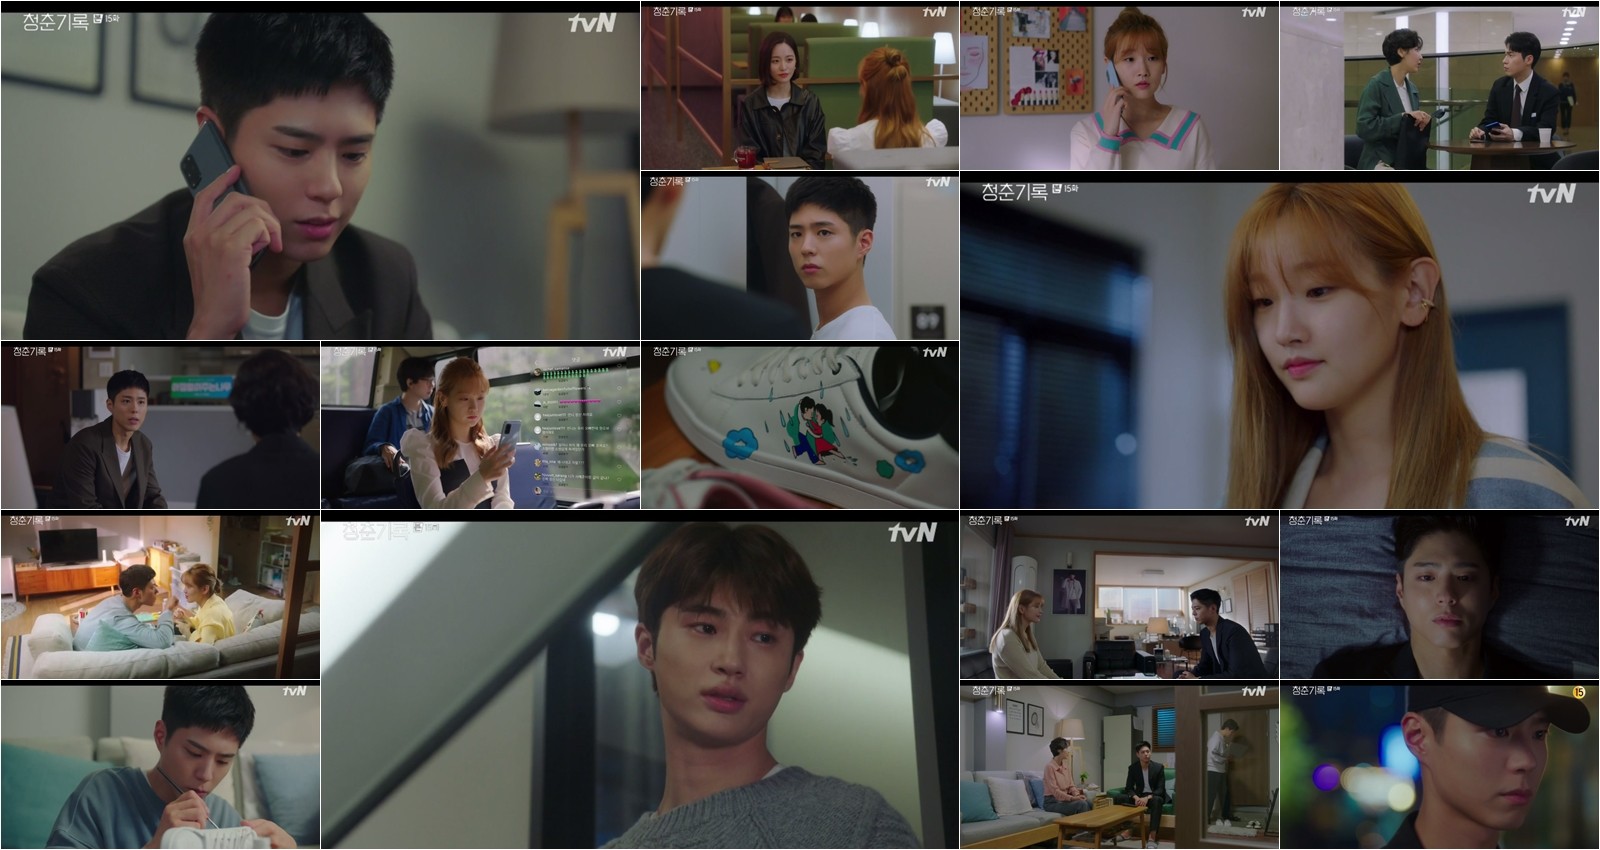 The fever of Record of Youth Park Bo-gum made the hearts of viewers.On the same day, Ahn Jeong-ha (Park So-dam) said goodbye to Park Bo-gum, who made it difficult for the two to say that Im sorry than Love became a habit.I decided to end the stable love, and Sa Hye-joon chewed on his pain.Sa Hye-joon prepared the event for the stability that would have hurt him by this incident, as he promised his unchanging love, leaving happy moments as a picture and presenting the only shoes, but it was counterproductive.I knew the sincerity of Sa Hye-joon in a stable gift, but I was hurt once again by my mothers snobbish thought that she would meet with Sa Hye-joon and benefit economically.The drama, which Sa Hye-joon appeared in the ongoing drama, also had problems. The scene atmosphere was cold due to the decline in TV viewer ratings, and the advertising company was also dissatisfied.In a situation that is not getting better, Lee Min-jae asked Sa Hye-joon to release the letter, but he wanted to keep his conviction saying he could still endure it.Sa Hye-joon, who is tired of exhaustion, expressed his intention to rest after finishing this work. It is not all that you can see, said Sa Hye-joon, a manager named Chi-young (Kim Min-chul), who is unwavering.I cry every night, so I laugh during the day. The reality of Sa Hye-joon, who can not be happy even after dreaming, was sad.I finally broke up with Sa Hye-joon, who had been struggling for a hard time, and said, Do you remember saying that I will never say sorry if I love you?Do you know how many times Im sorry when I met you? Sa Hye-joon could only say sorry.I know that Sa Hye-joon is harder than anyone else, so I am stable. I will not do what I get anymore.I will go back to my daily life before I love you. Sae Hye-joon could not catch him.The situation that even his loved one could not keep hurt him. The emptiness grew bigger as negative public opinion was poured into the text disclosure with Charlie Chung, who thought it was a breakthrough in the crisis.The tears of Sa Hye-joon, who blamed himself for not being able to keep his promise that he would do better to never say sorry to his beloved lover, have brought empathy.The reality of being able to keep things of value, though he had achieved Actors dream, made him unhappy. He realized the limit of his conviction.Sa Hye-joon, who was breathing and breathing in pain, looked for the stable again as if he had decided to do it. I can not break up with you.